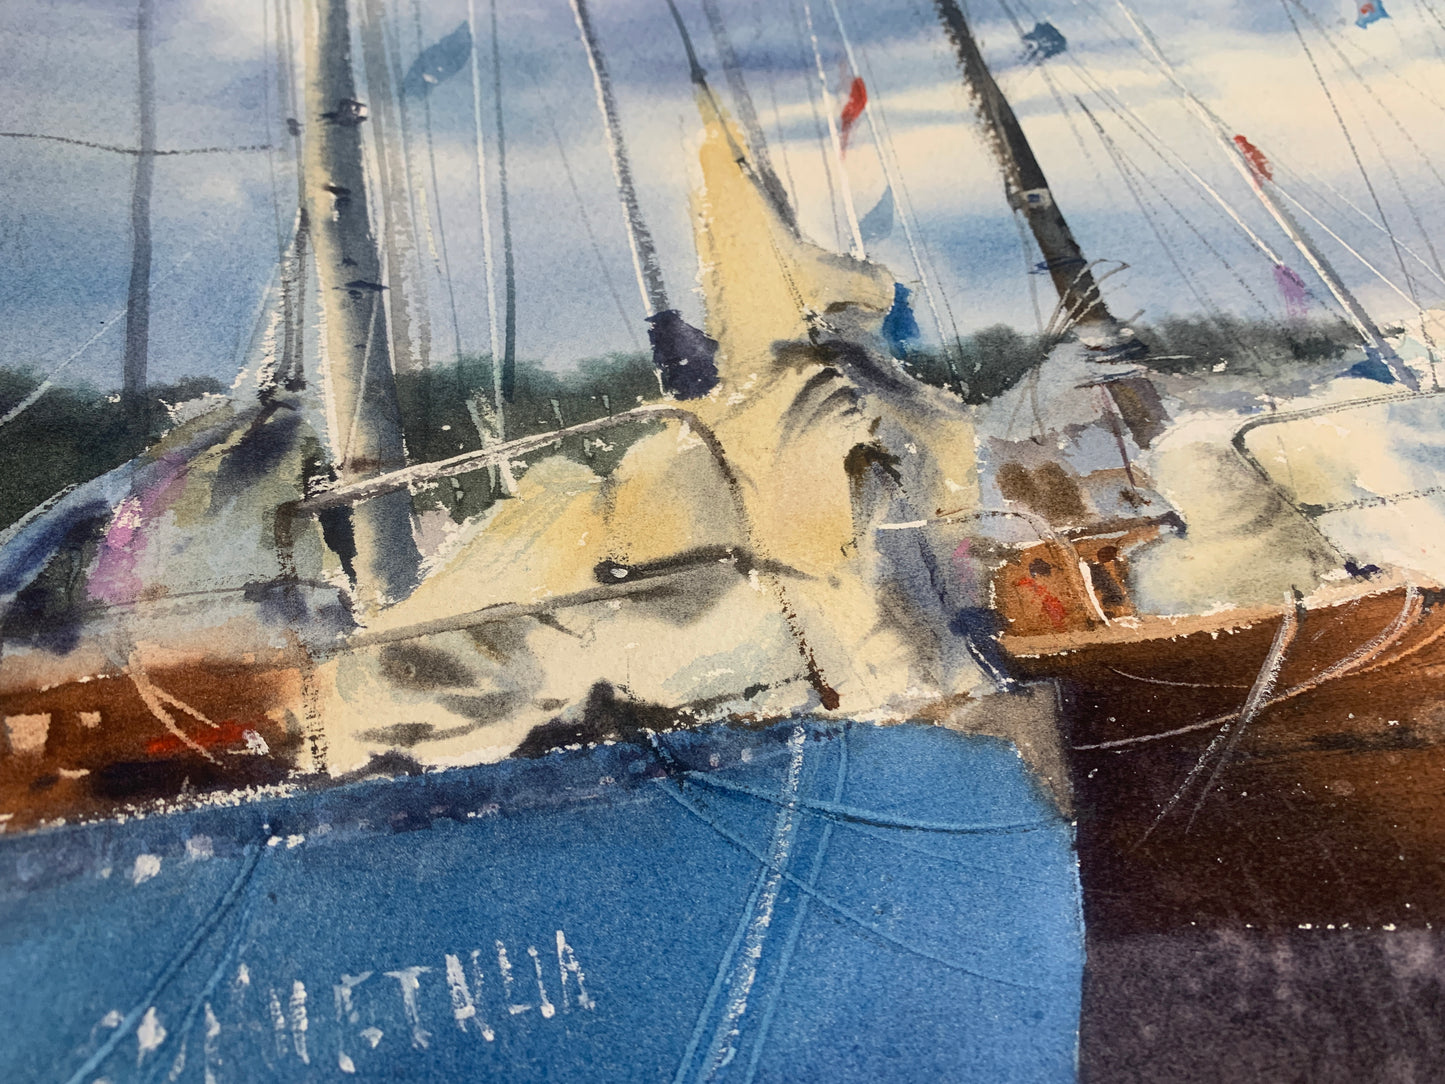 Yachts Moored at the Pier, Original Watercolor Painting, Unique Exhibition Artwork